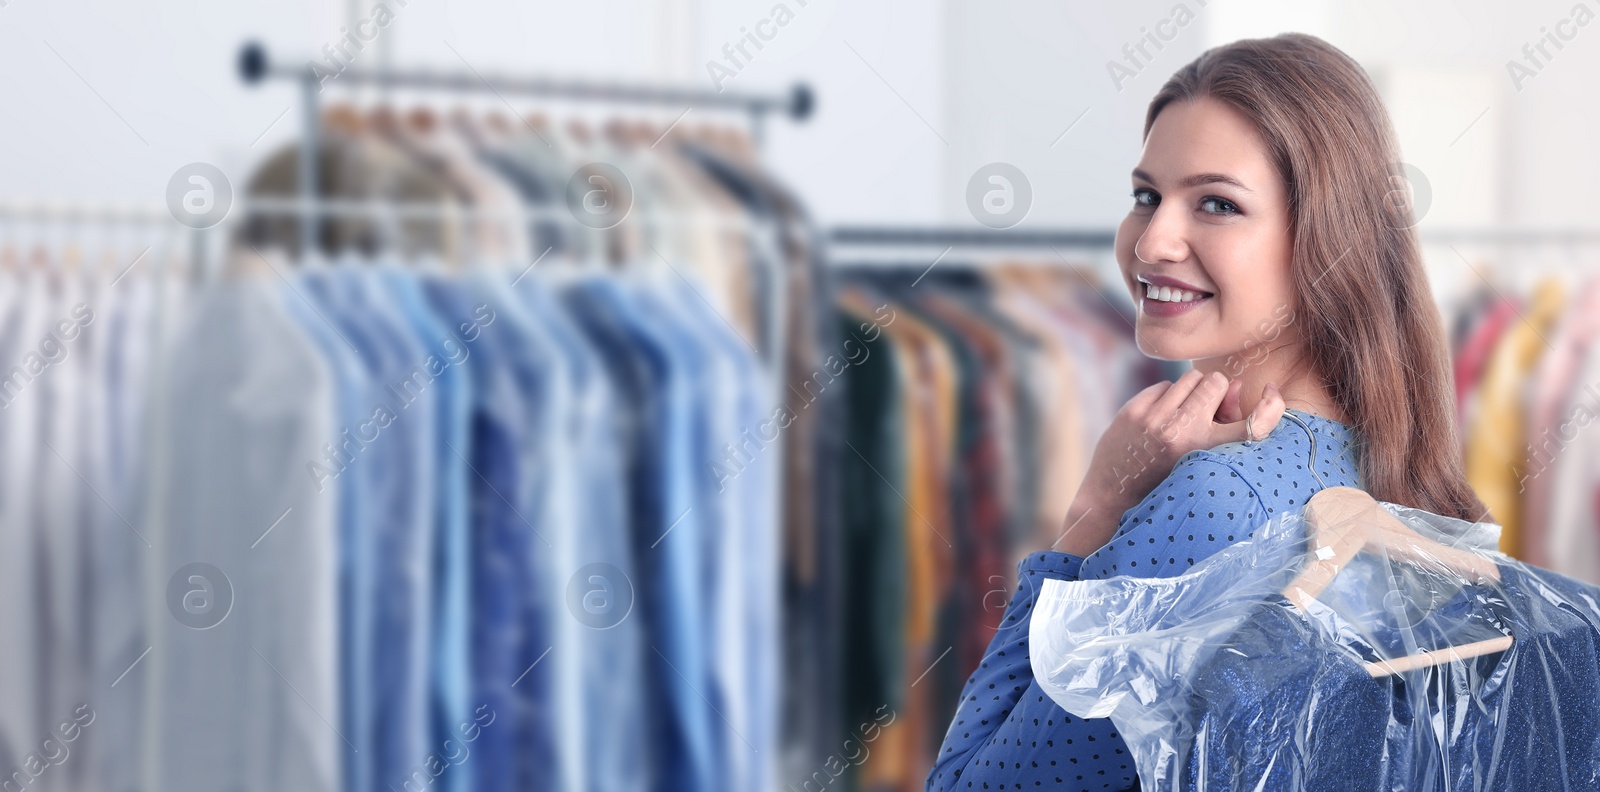 Image of Dry-cleaning service. Happy woman holding hanger with dress in plastic bag indoors, space for text. Banner design